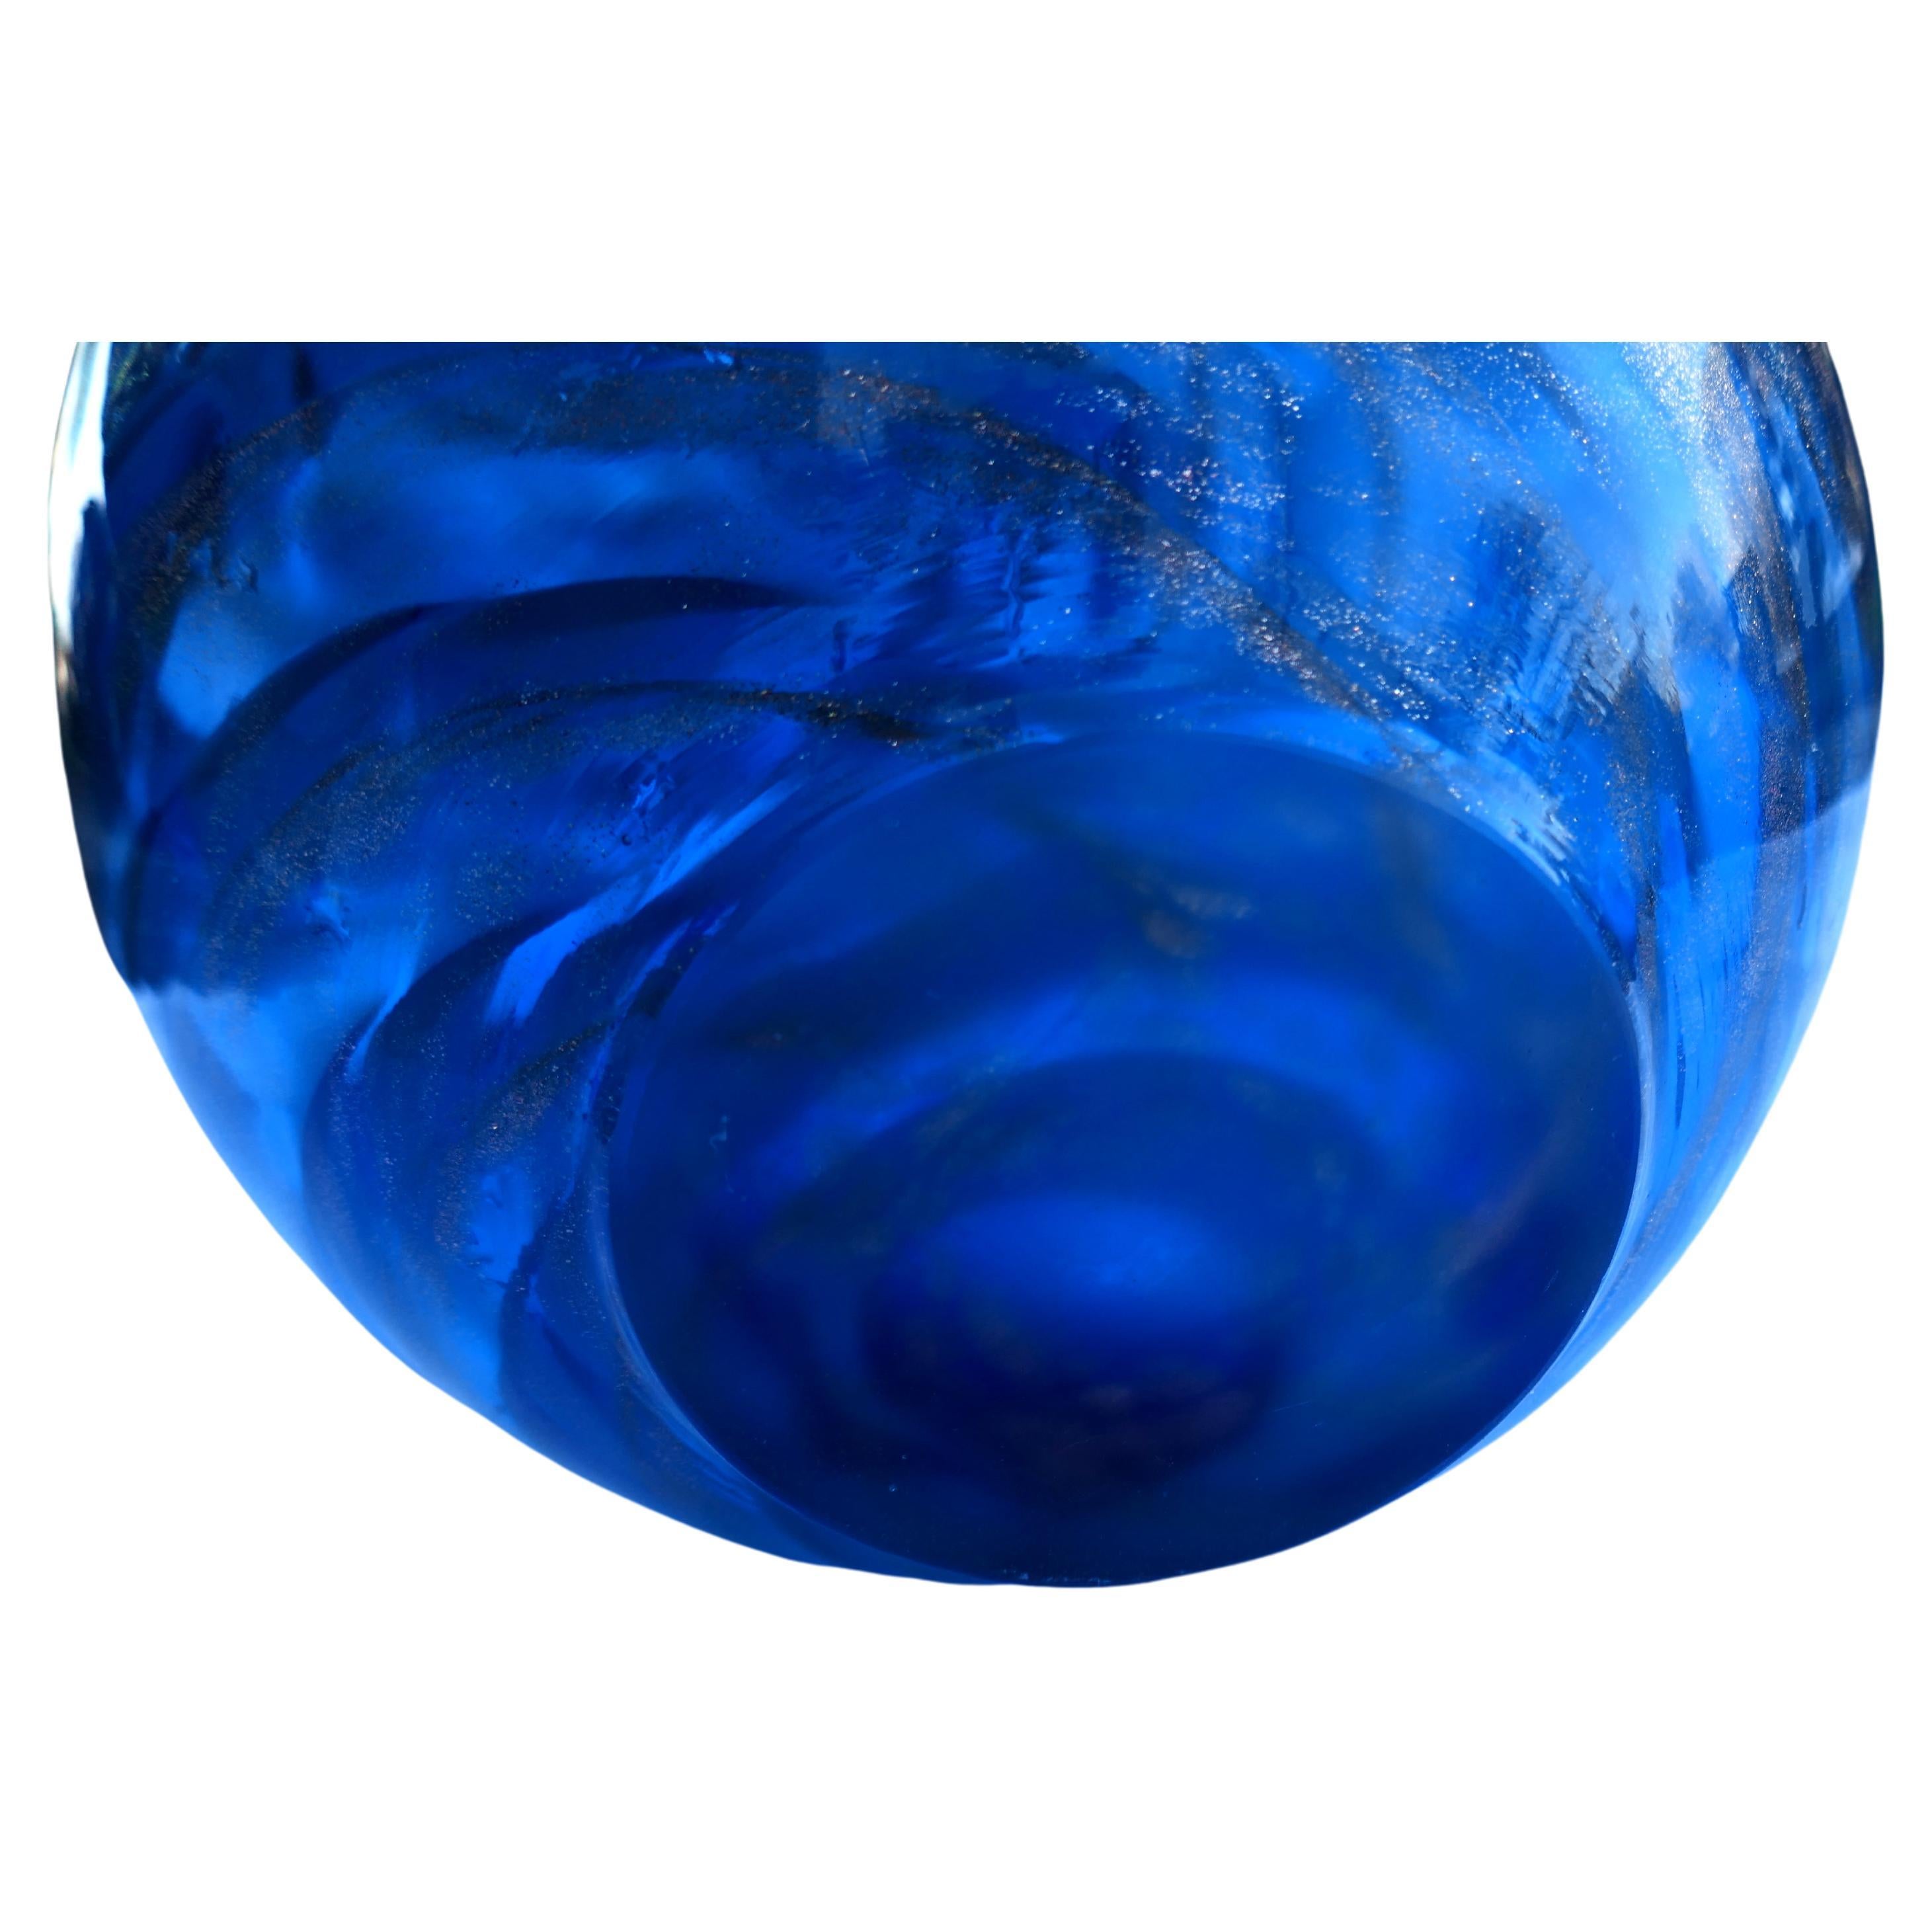 Perfect glass vase by Fratelli Toso
Thank you